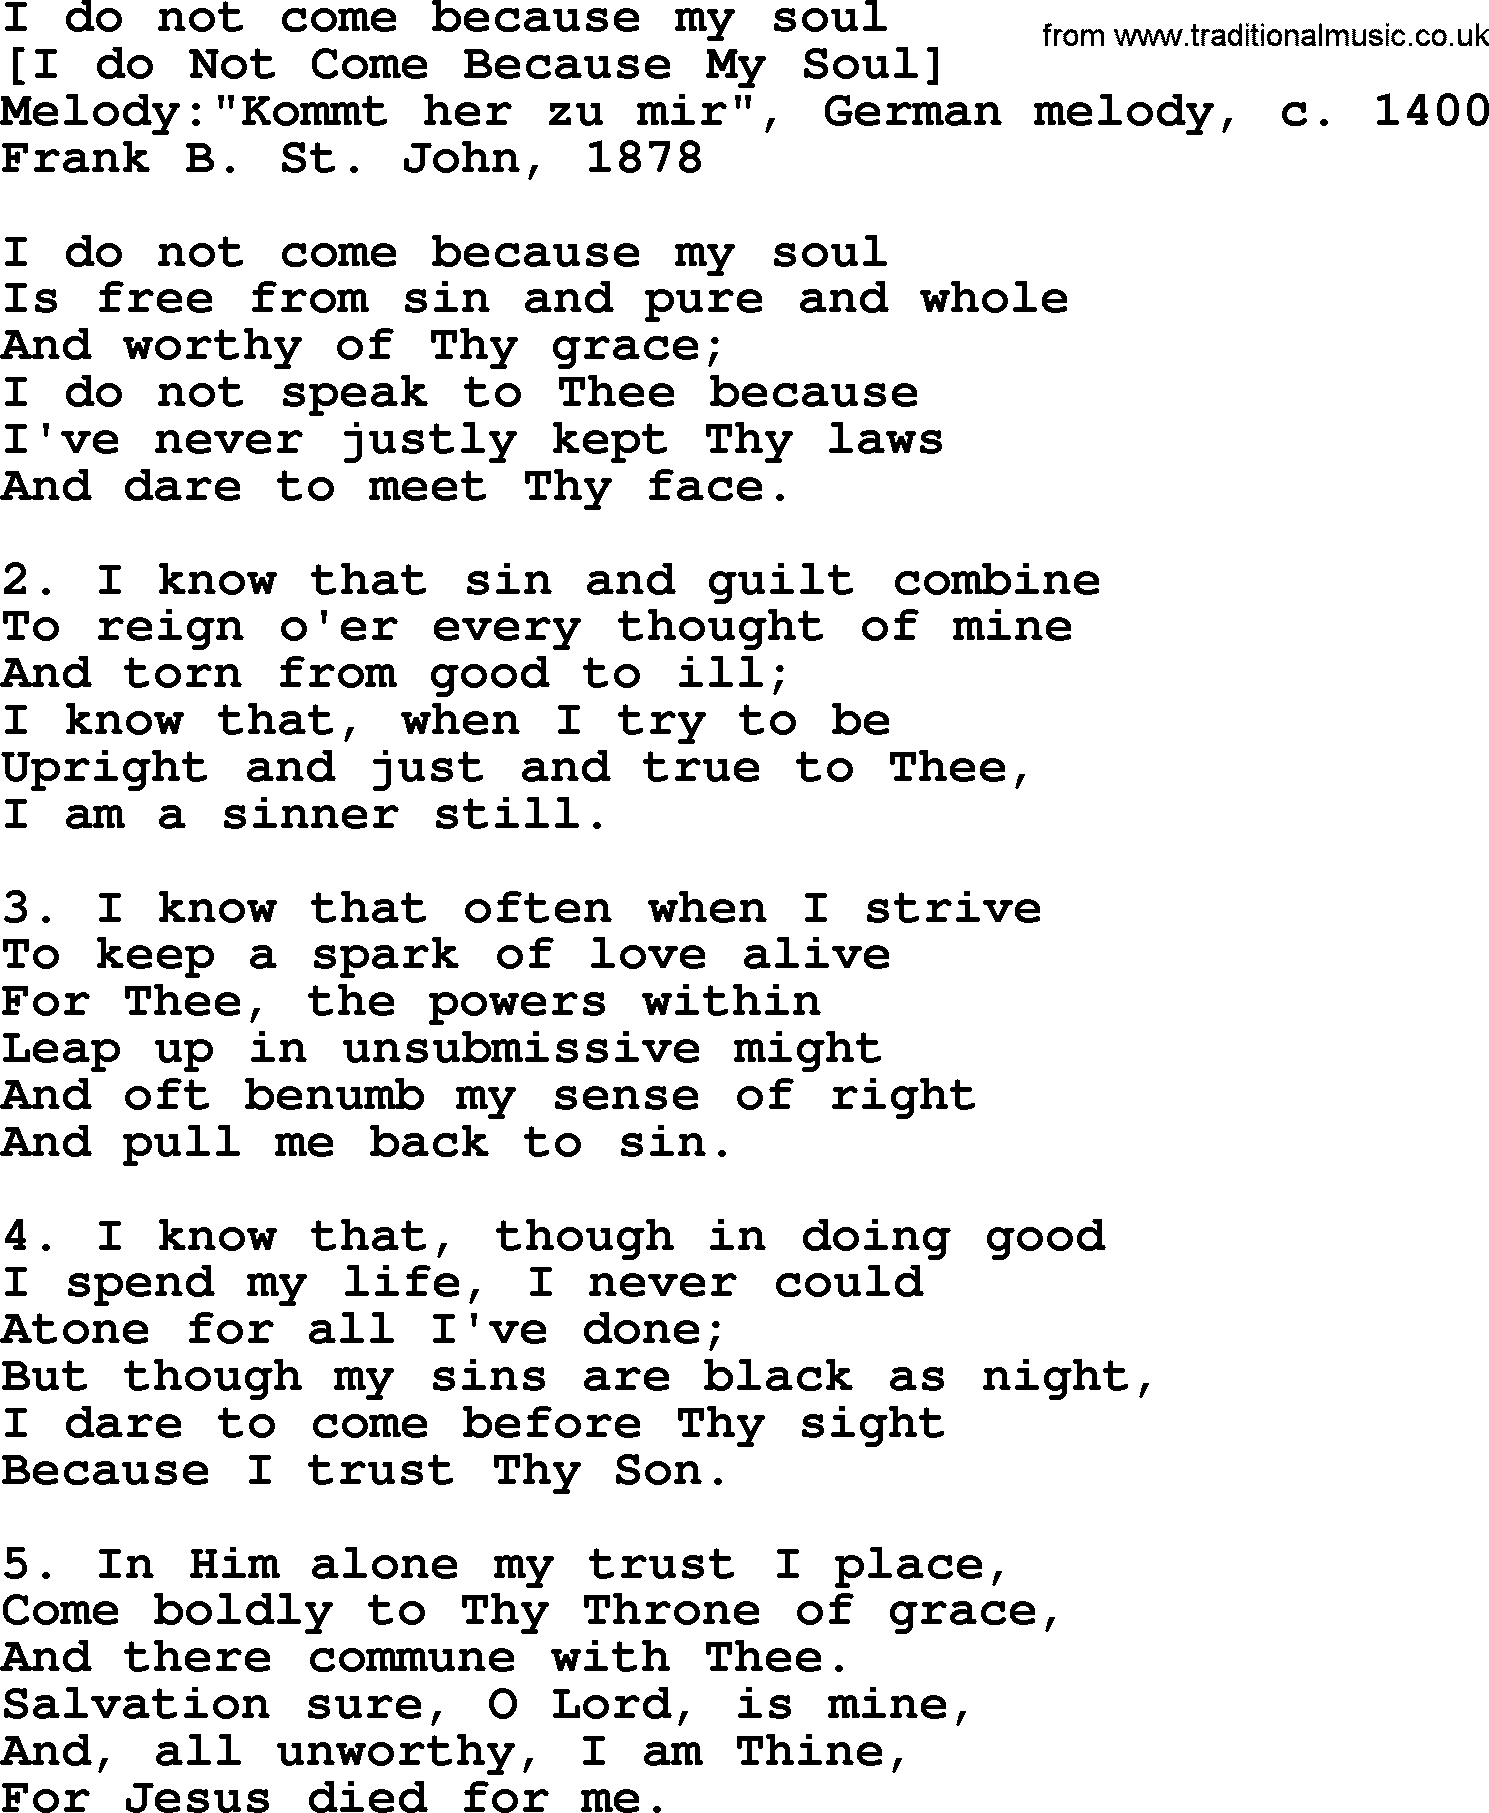 Old American Song: I Do Not Come Because My Soul, lyrics